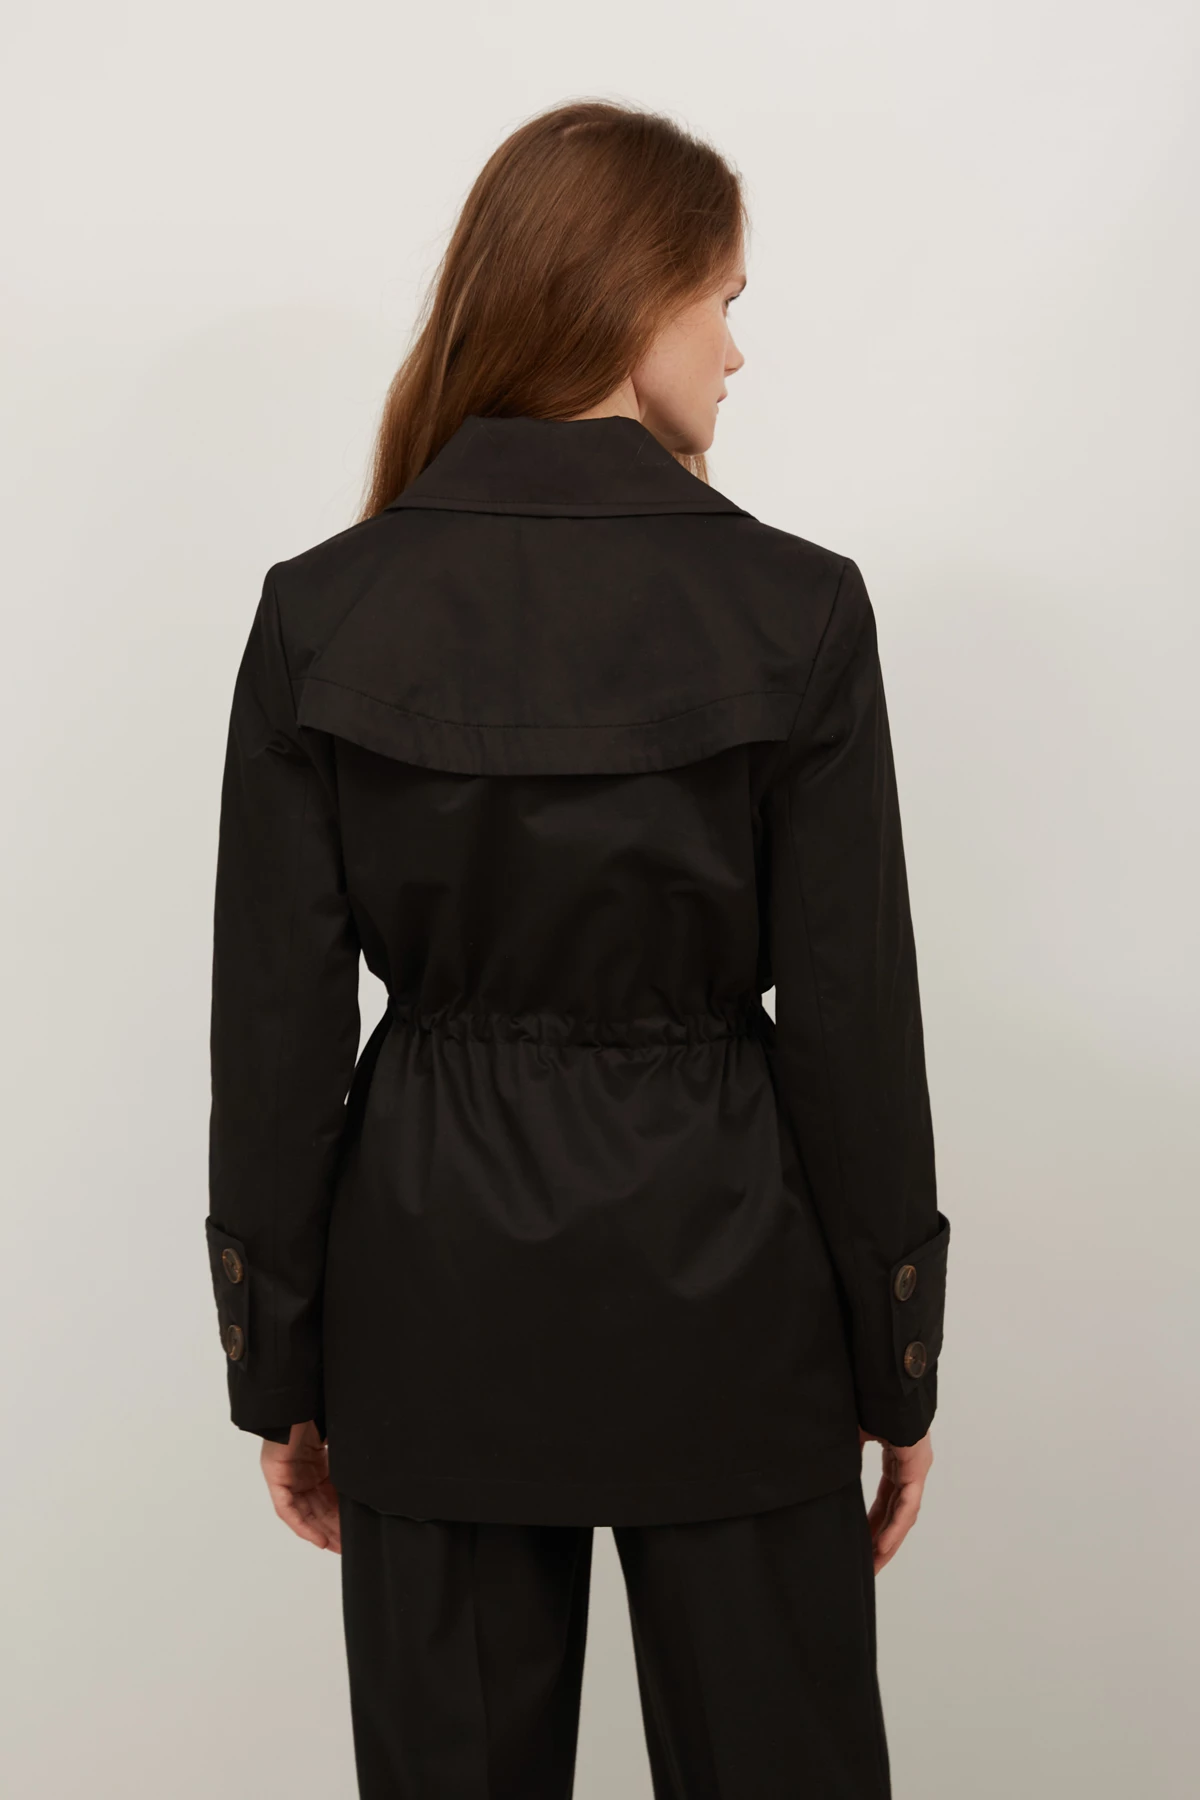 Short jacket with raincoat fabric in black color, photo 4